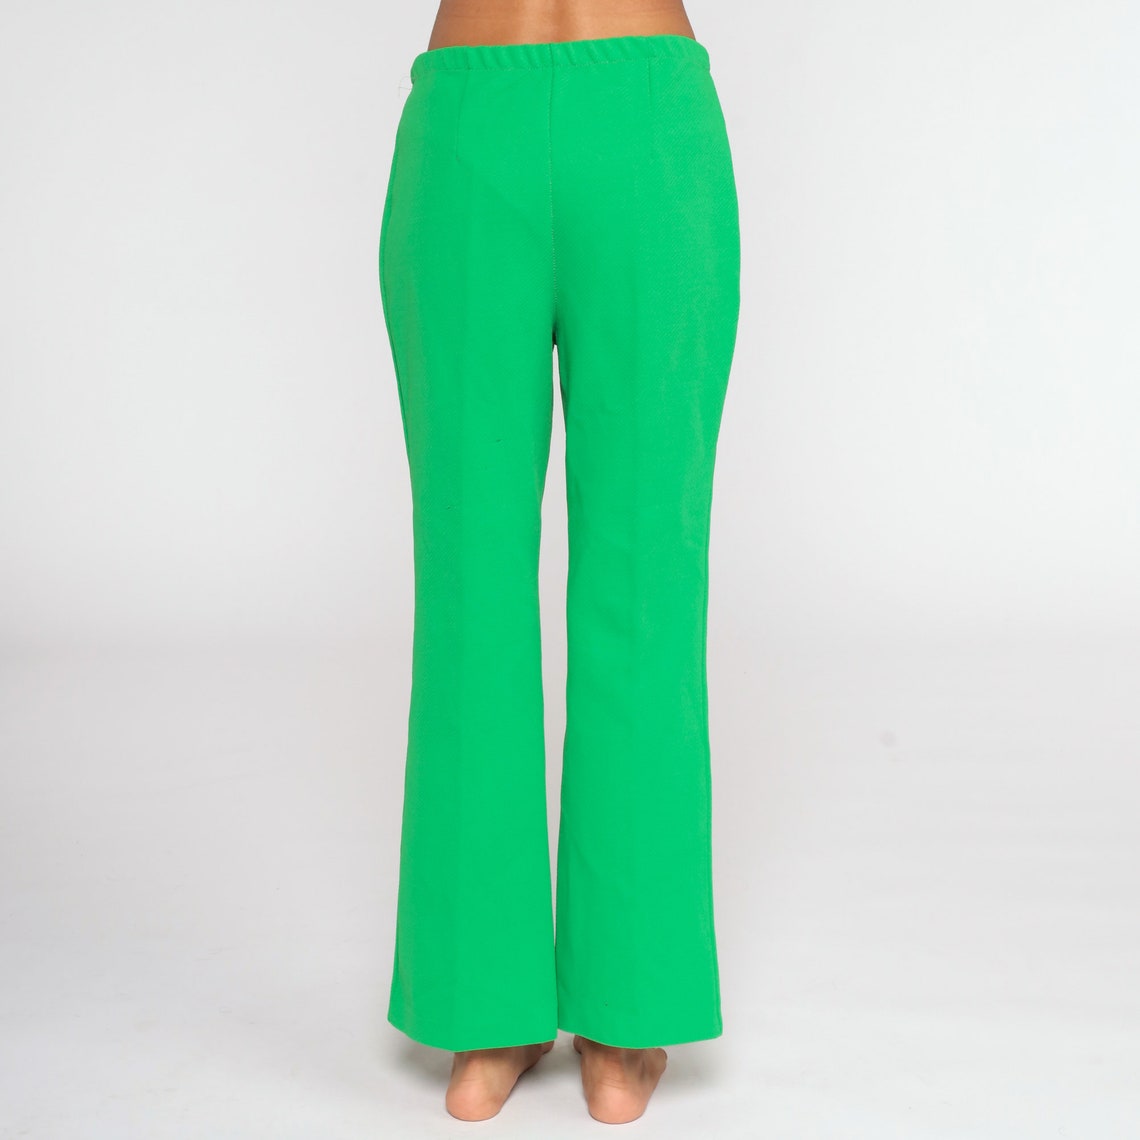 Green Bell Bottom Pants 70s High Waisted Trousers Boho Flared - Etsy